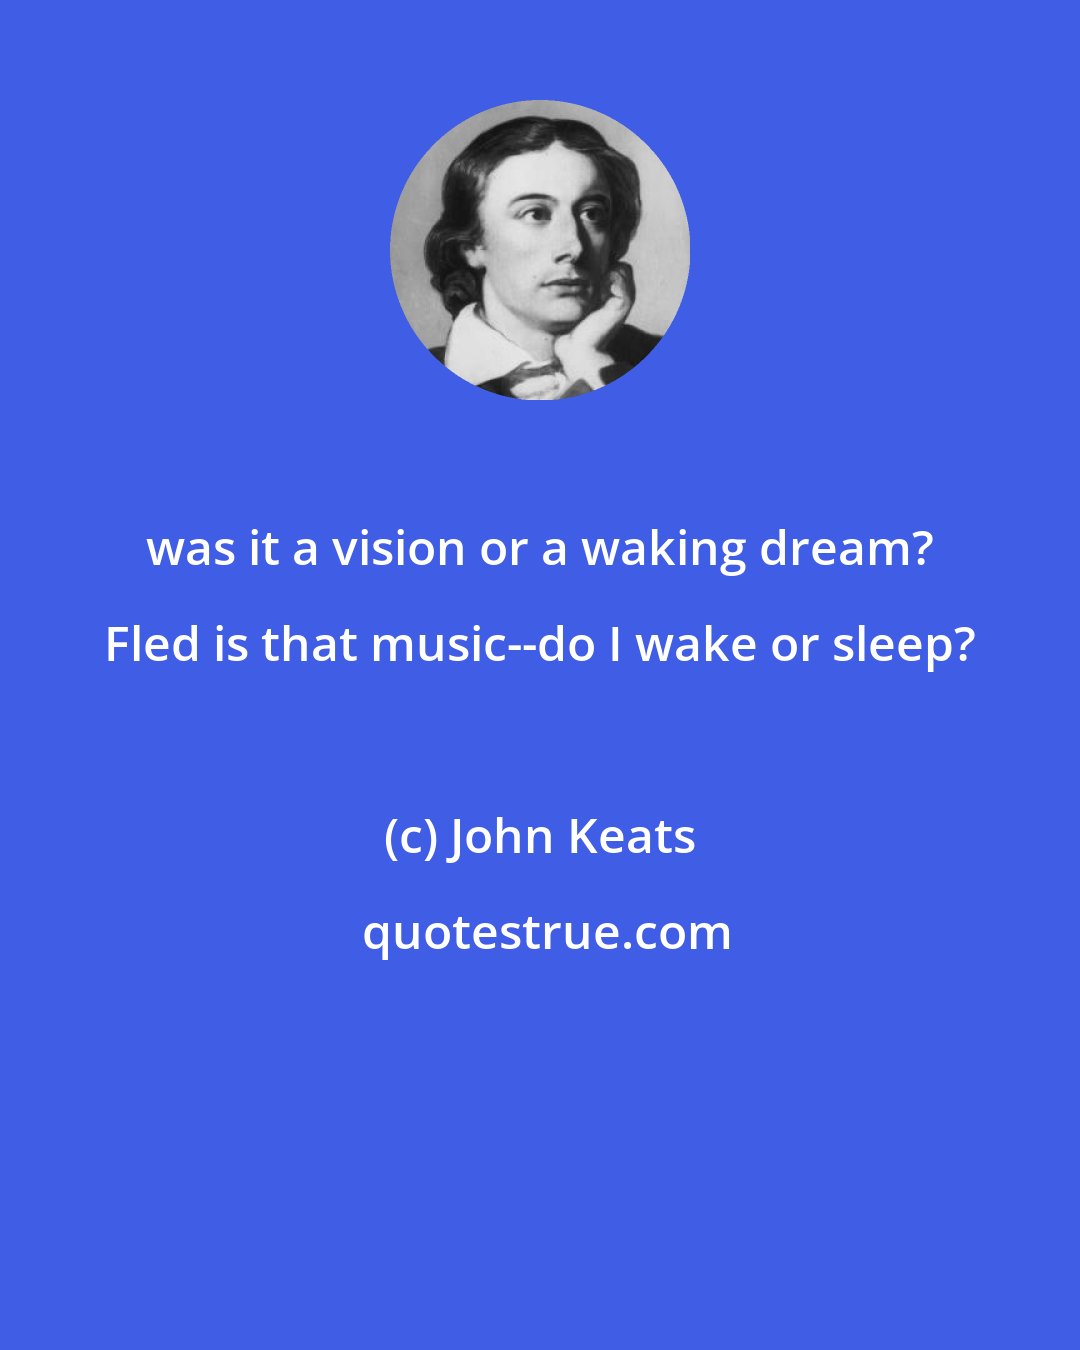 John Keats: was it a vision or a waking dream? Fled is that music--do I wake or sleep?